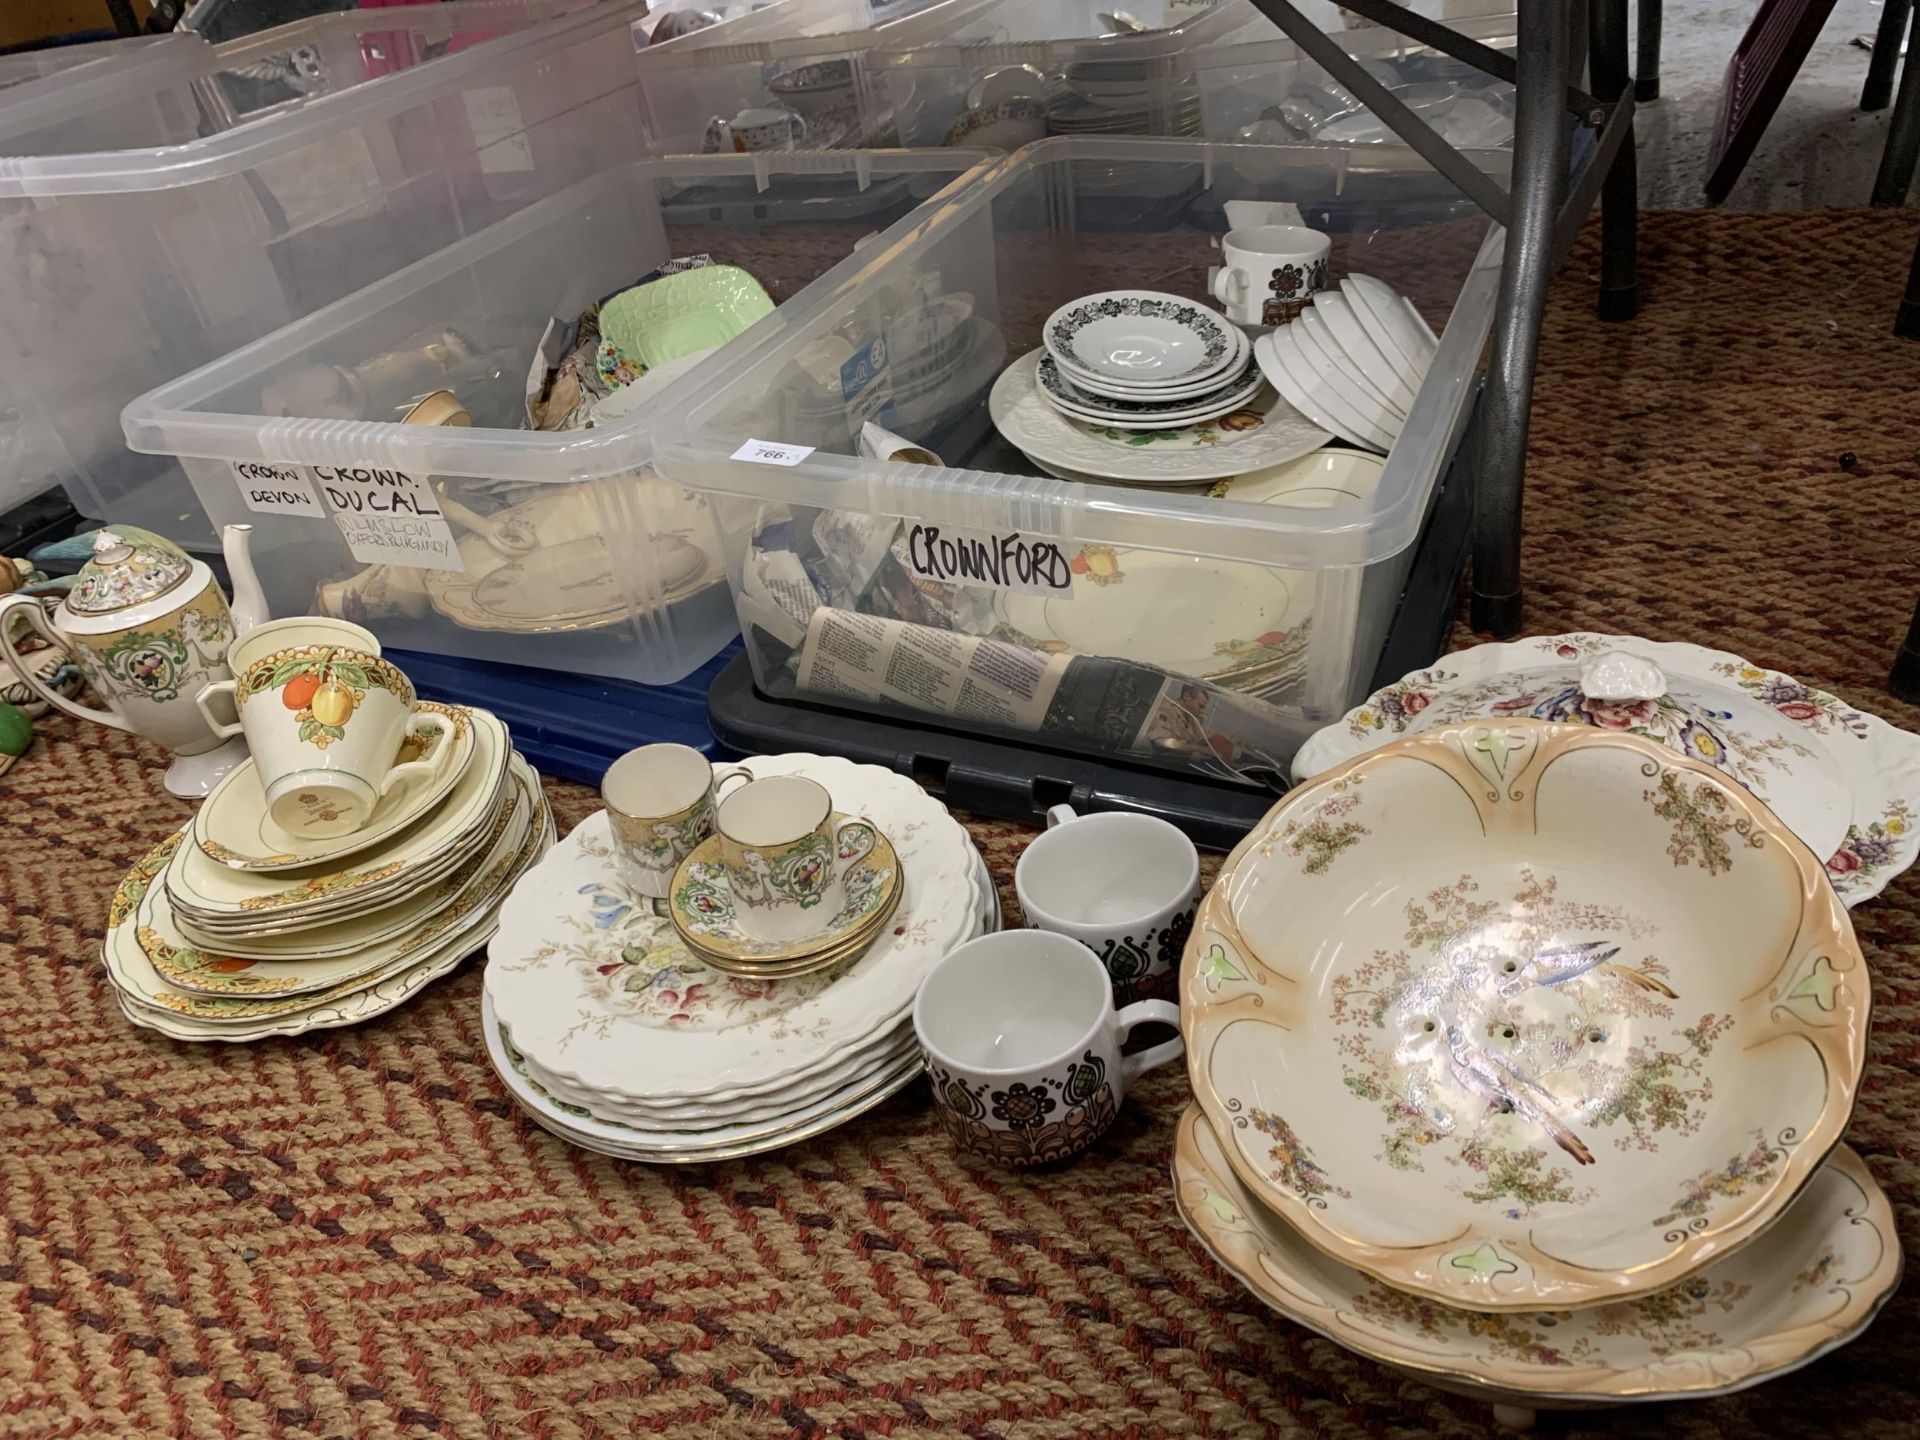 TWO BOXES OF ASSORTED CHINA TO INCLUDE CROWNFORD 'EDEN' PATTERN, BOOTHS, ETC